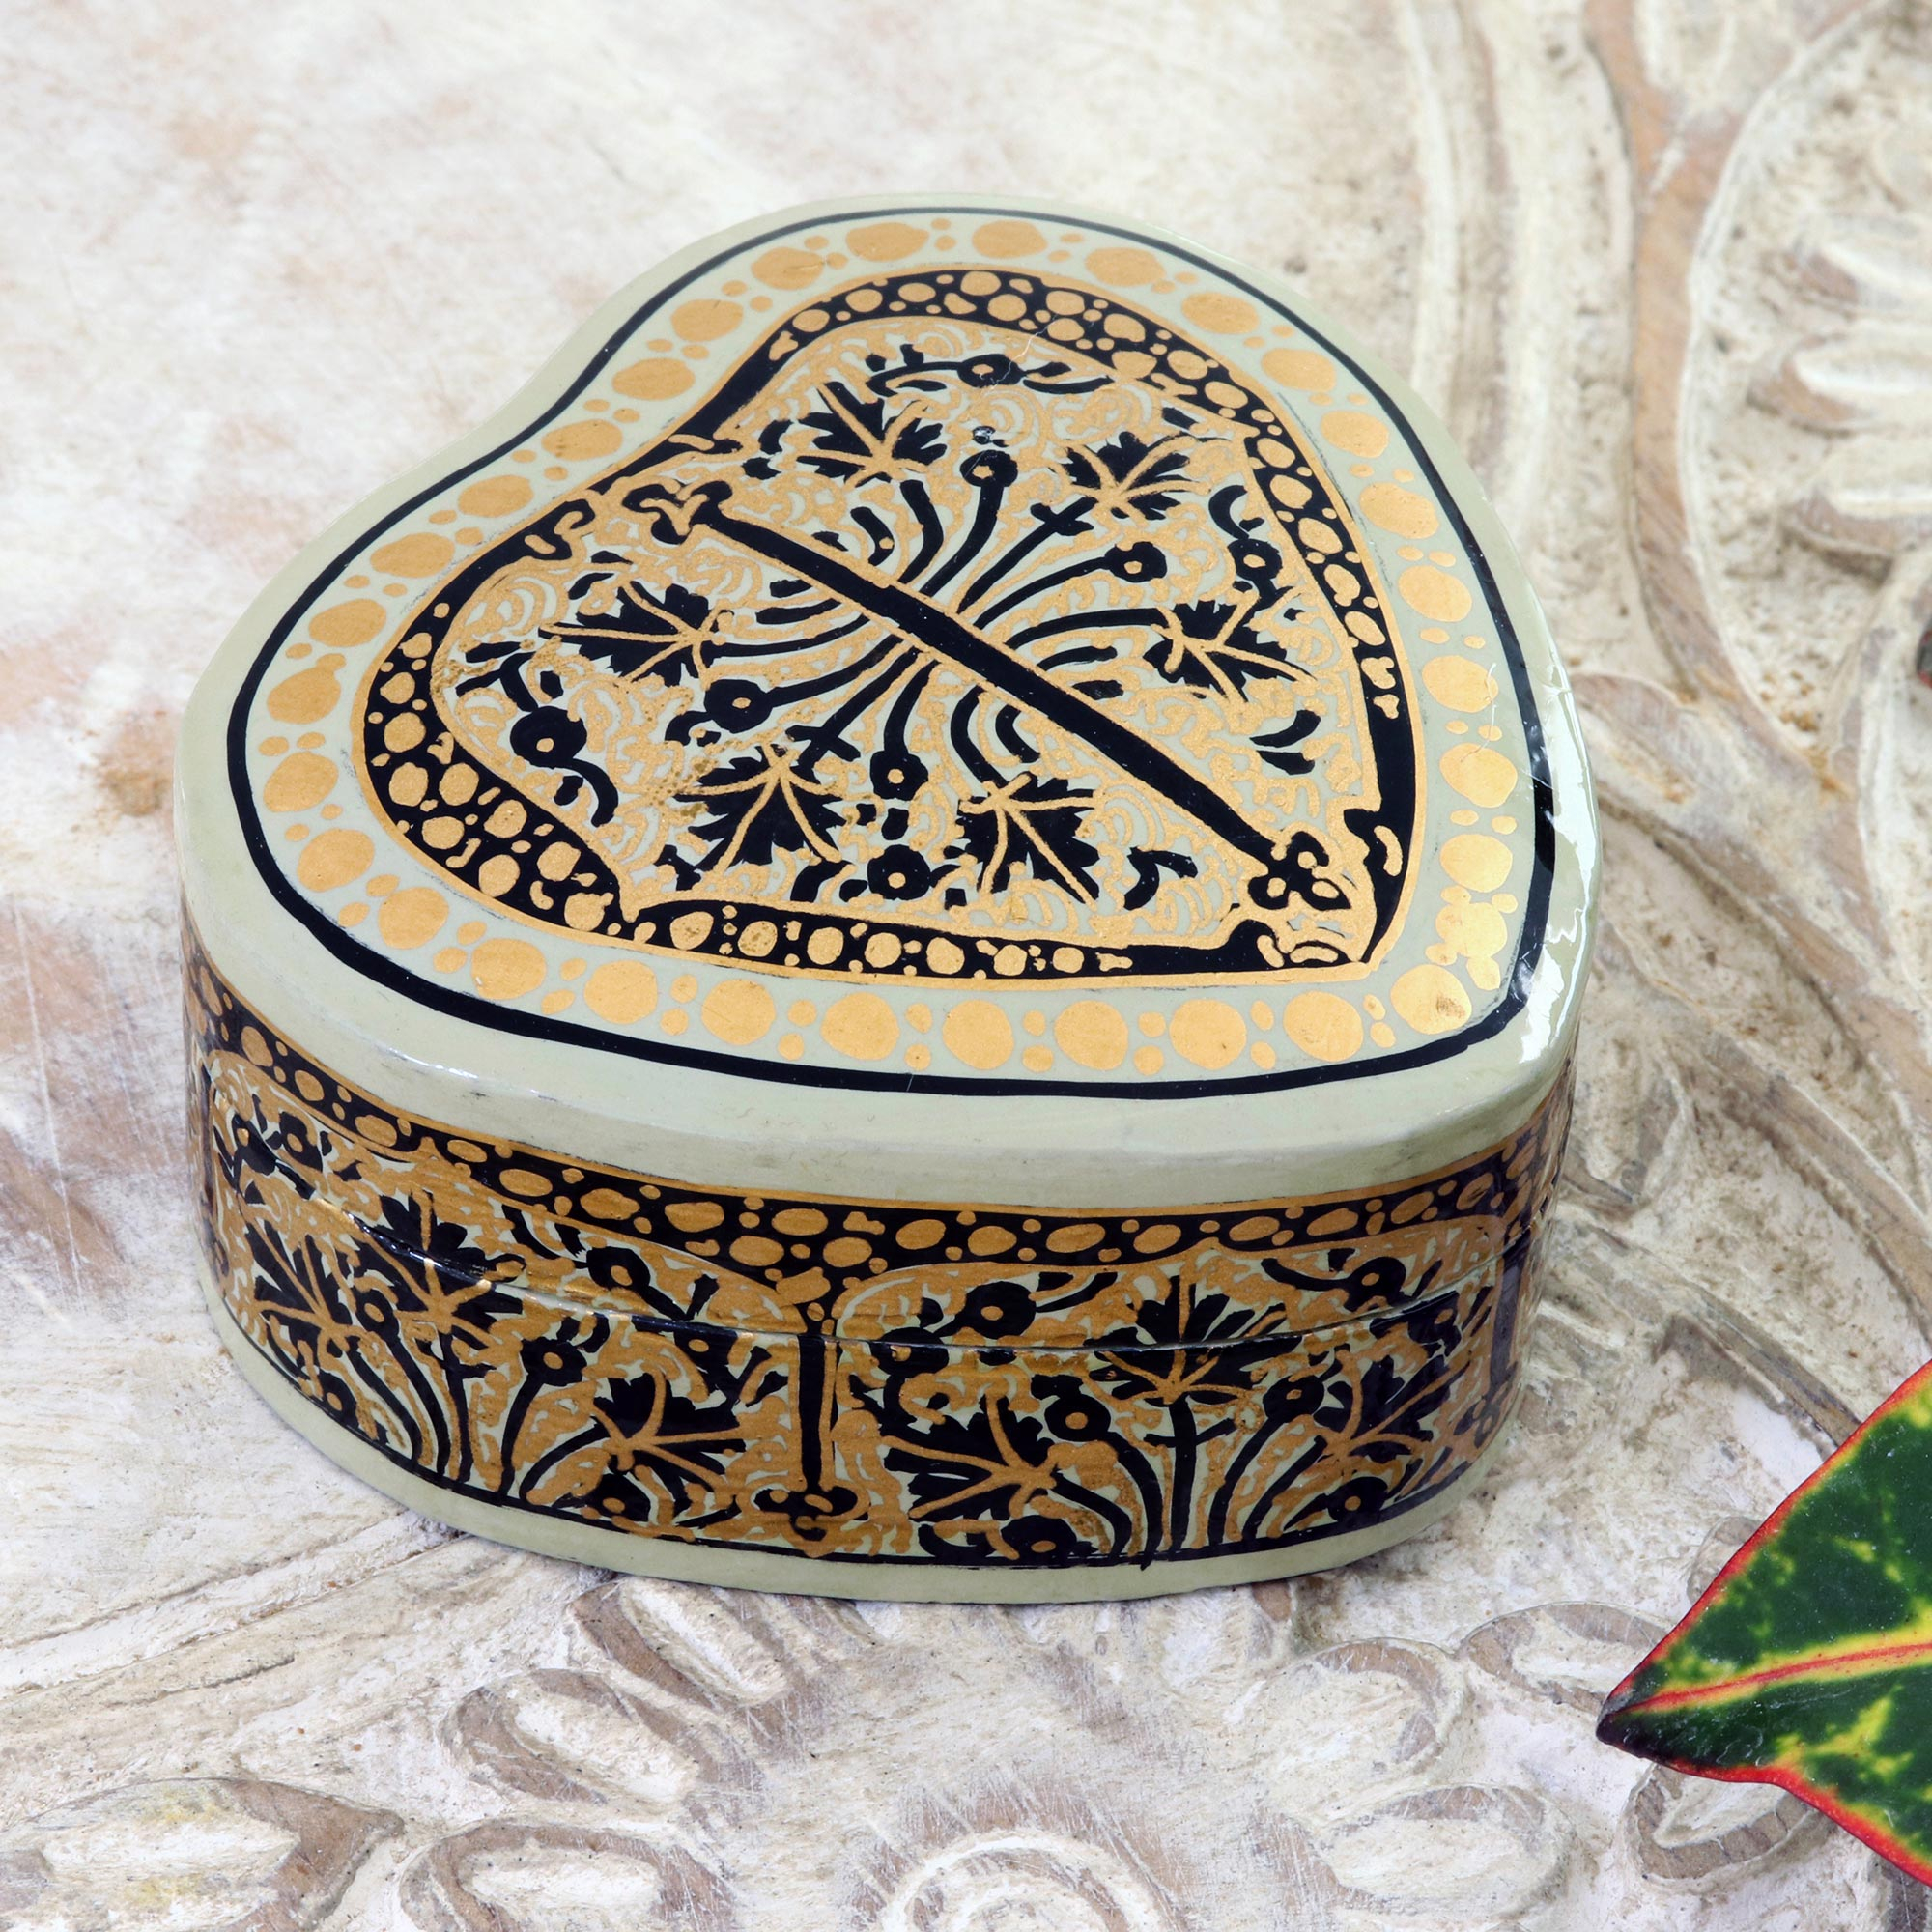 NOVICA Hand Painted Wood Mini Decorative Boxes (Pair) from India